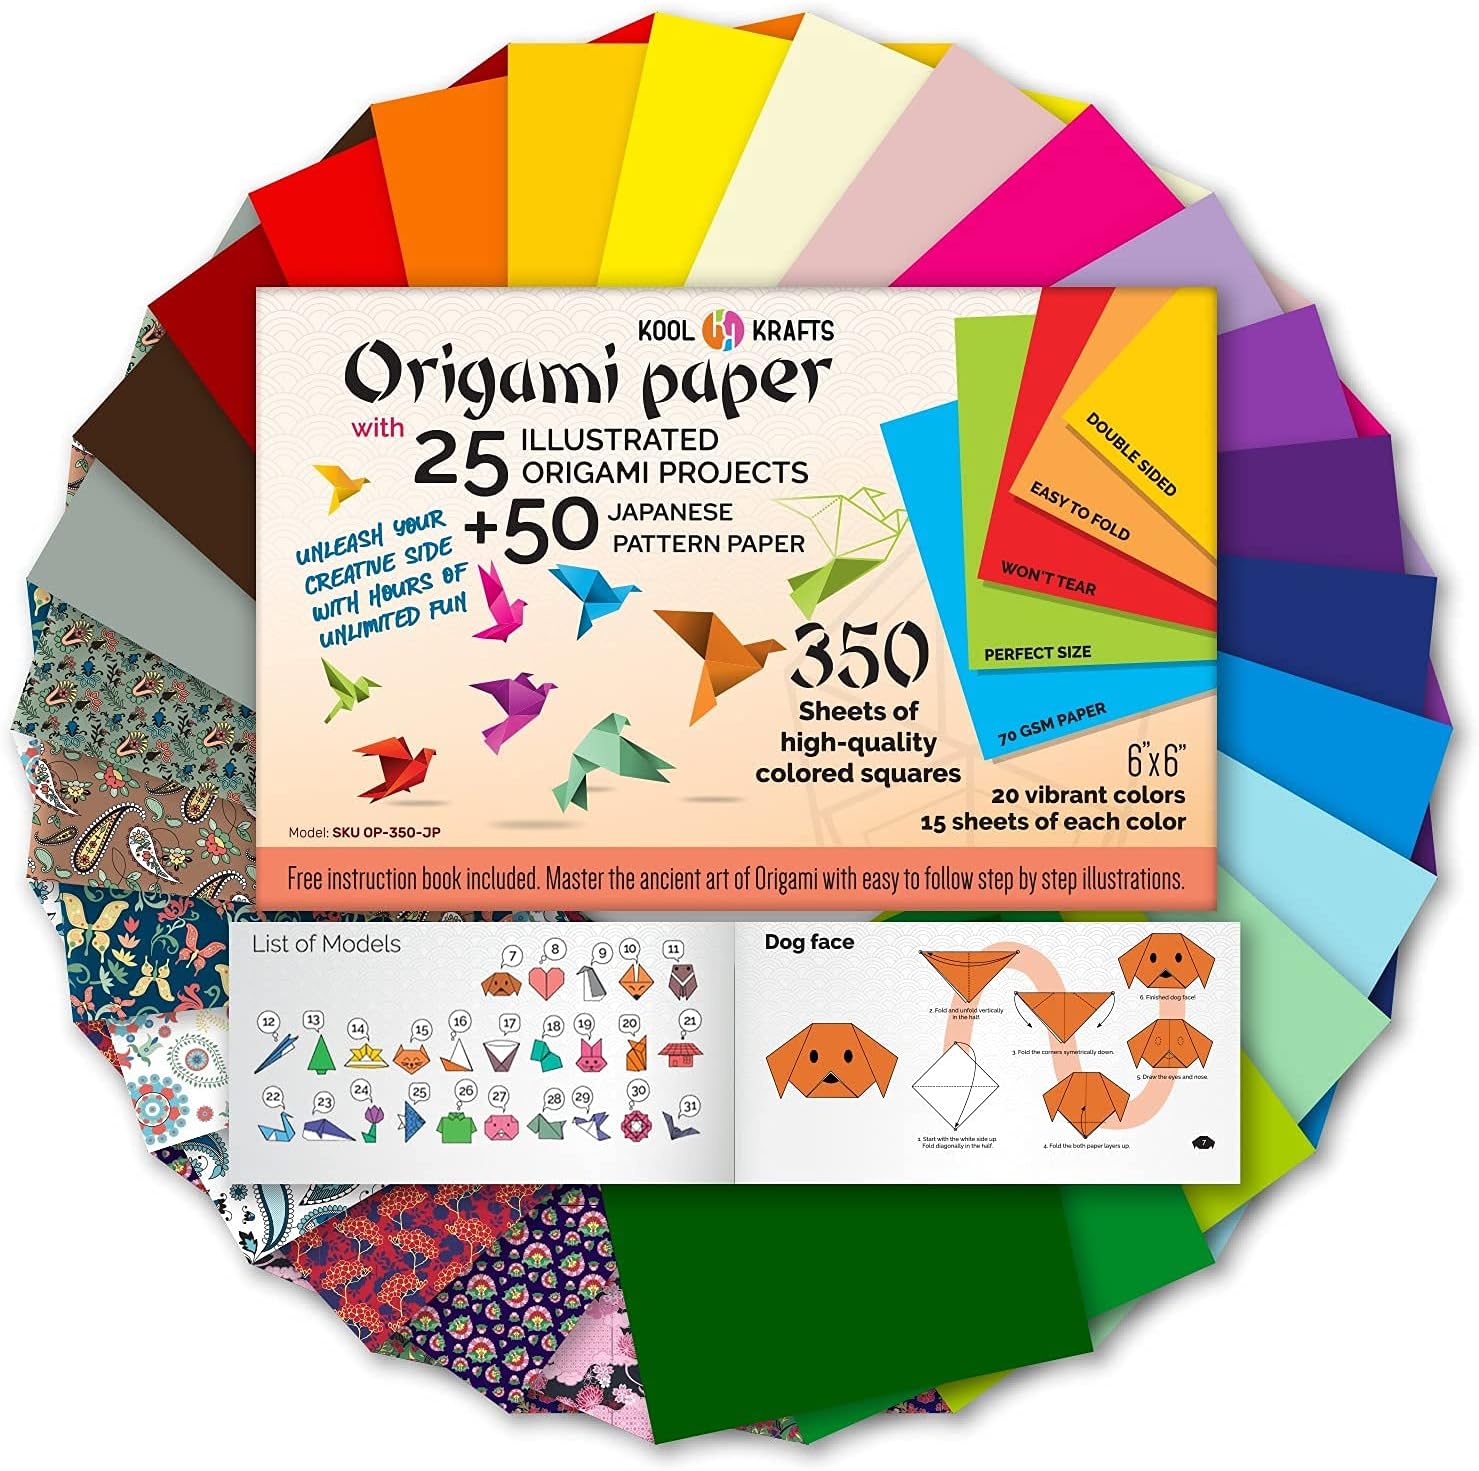 Origami Paper | 350 Origami Paper Kit | Set Includes - 300 Sheets 20 Colors 6x6 | 50 Traditional Japanese Patterns | Origami Book 25 Easy Colored Projects | Kids Crafts | Christmas Gifts for boys 8-12